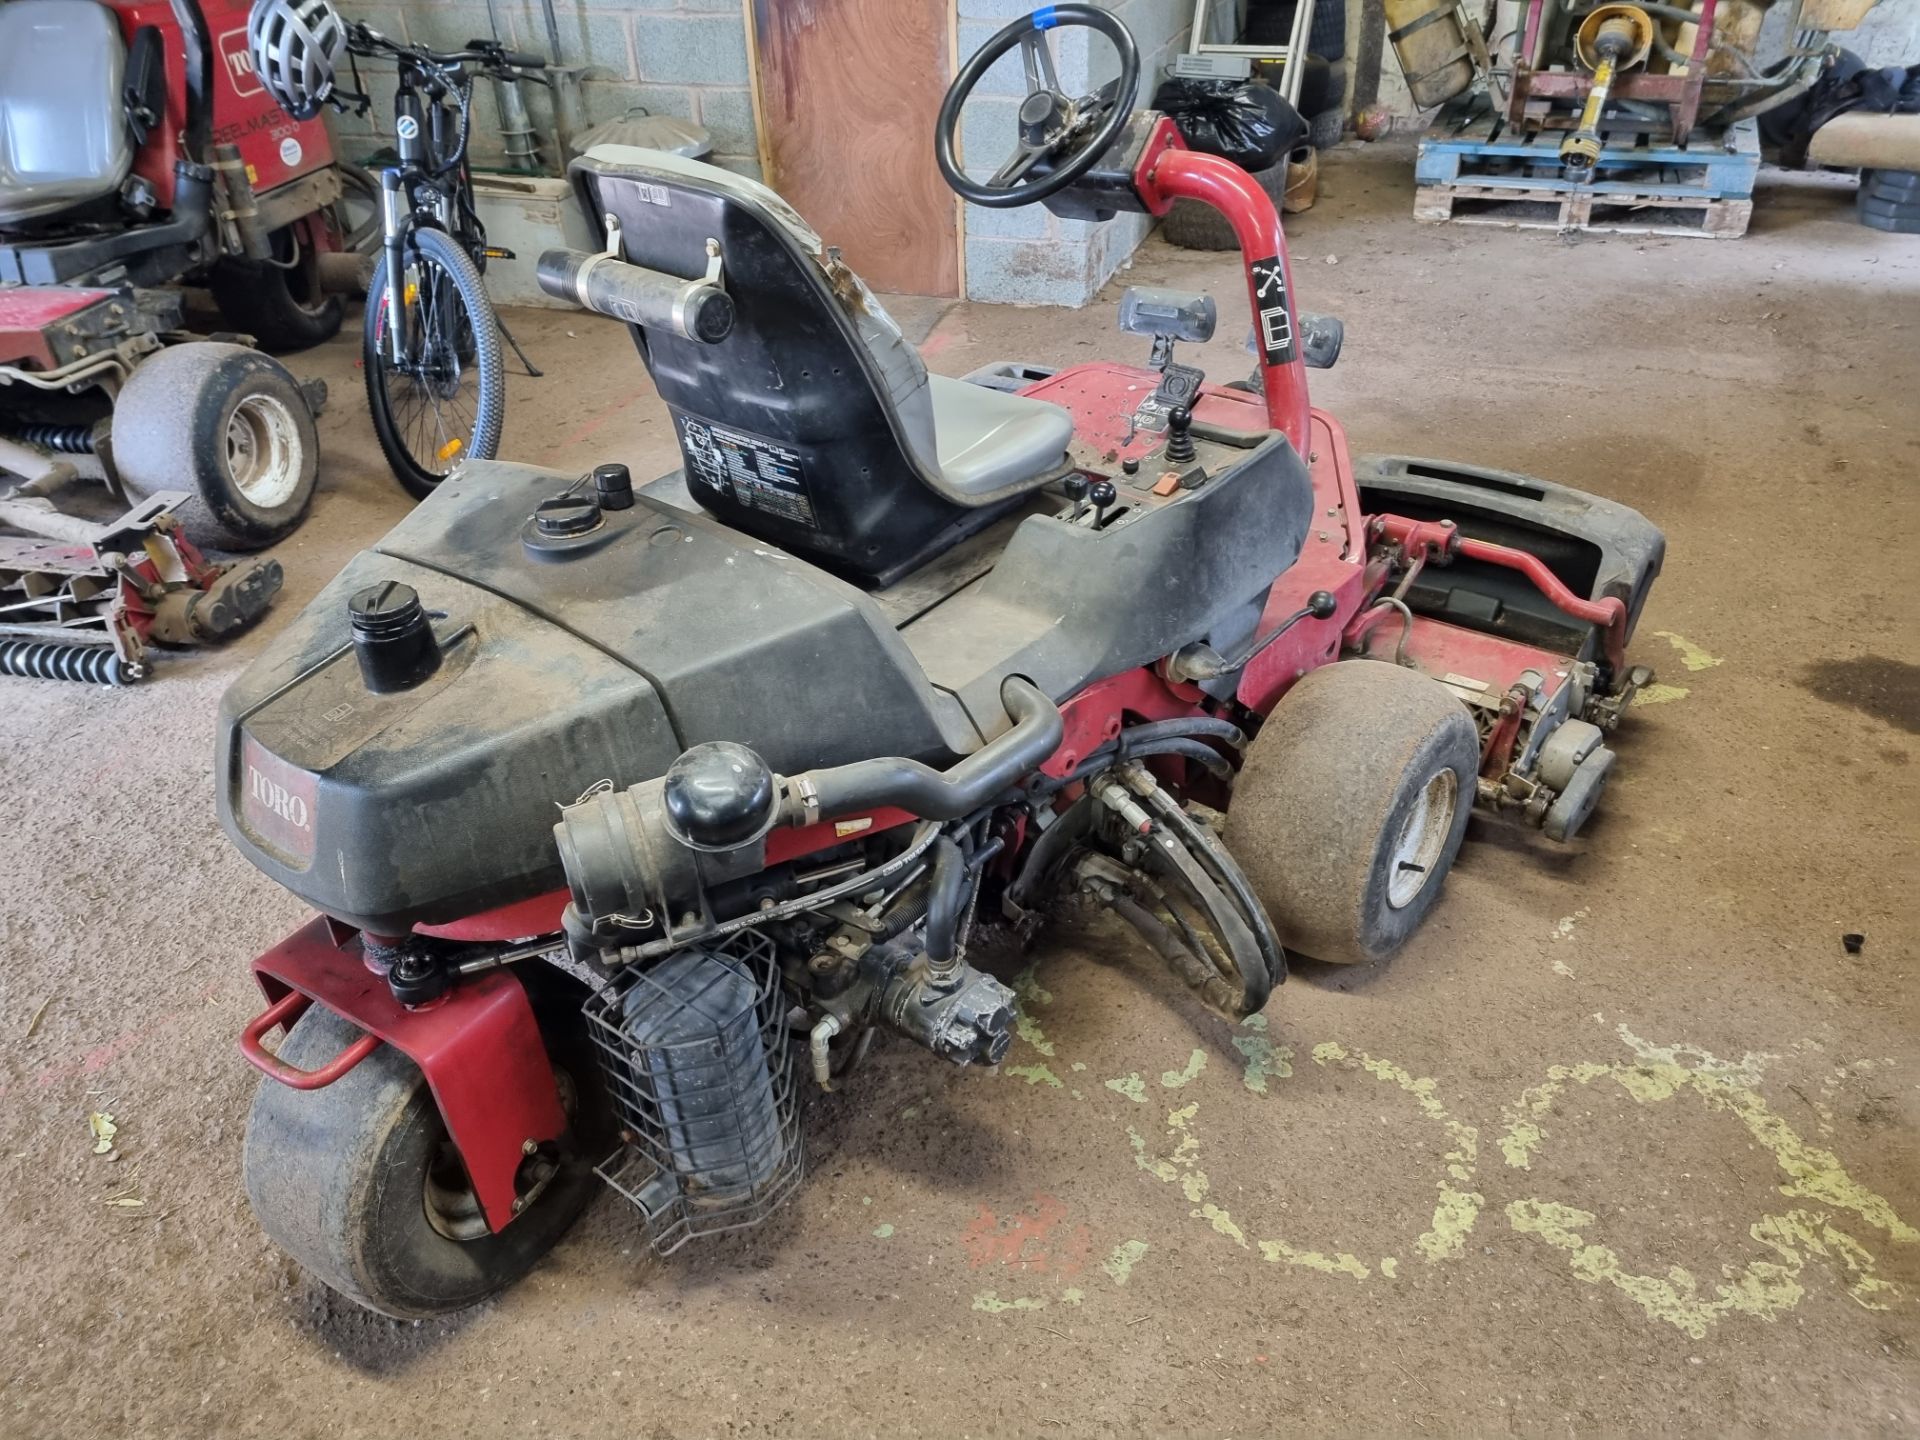 Toro Greensmaster 3250-D Mower YOM 2008 Hours 4121.6 (s/n 3632800001129) Features Briggs & - Image 7 of 10